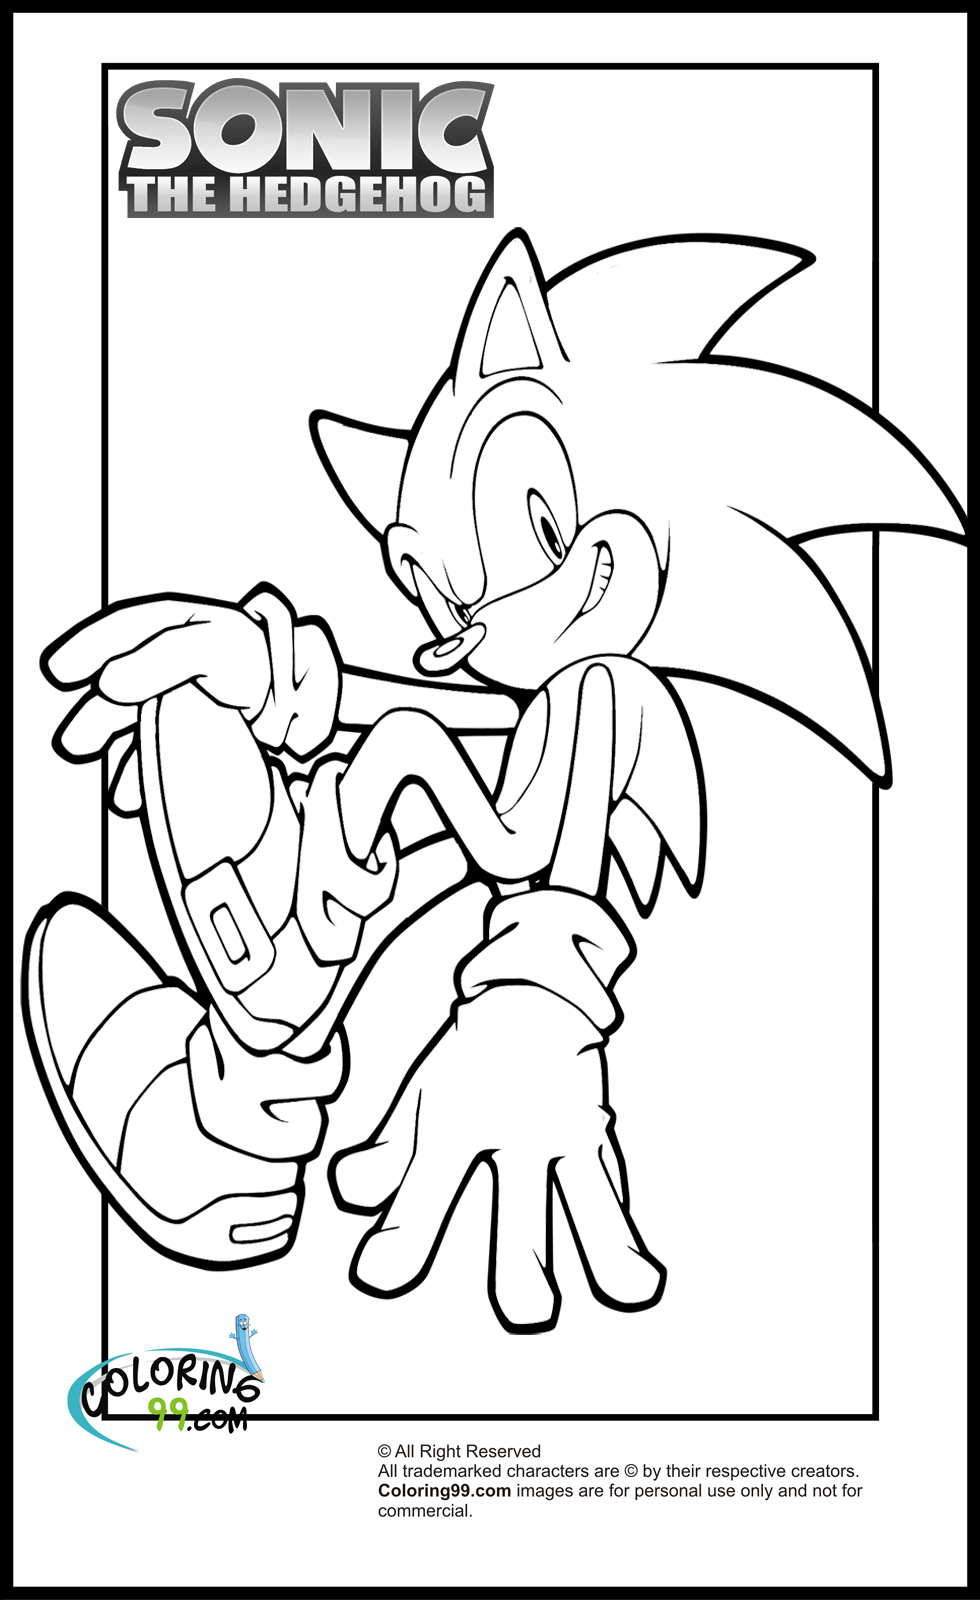  Sonic coloring pages | disney coloring pages for kids | color pages | coloring pages to print | kids coloring pages | #97